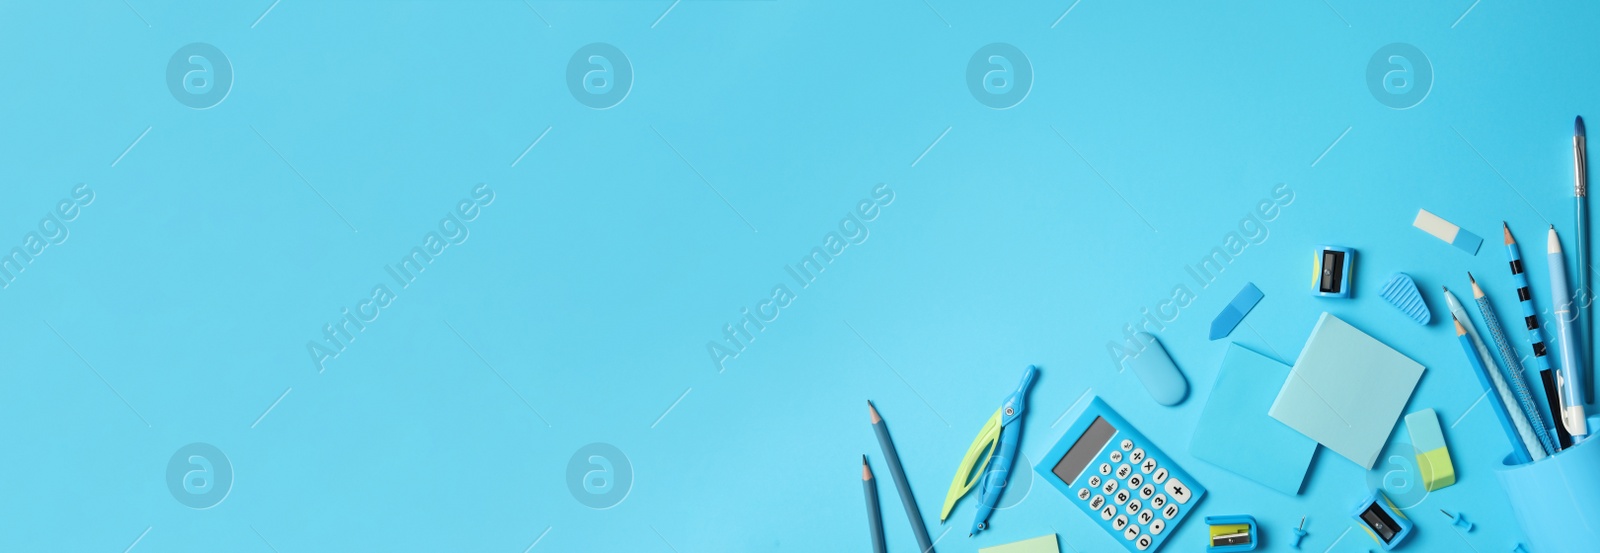 Image of Different stationery on light blue background, flat lay with space for text. Banner design